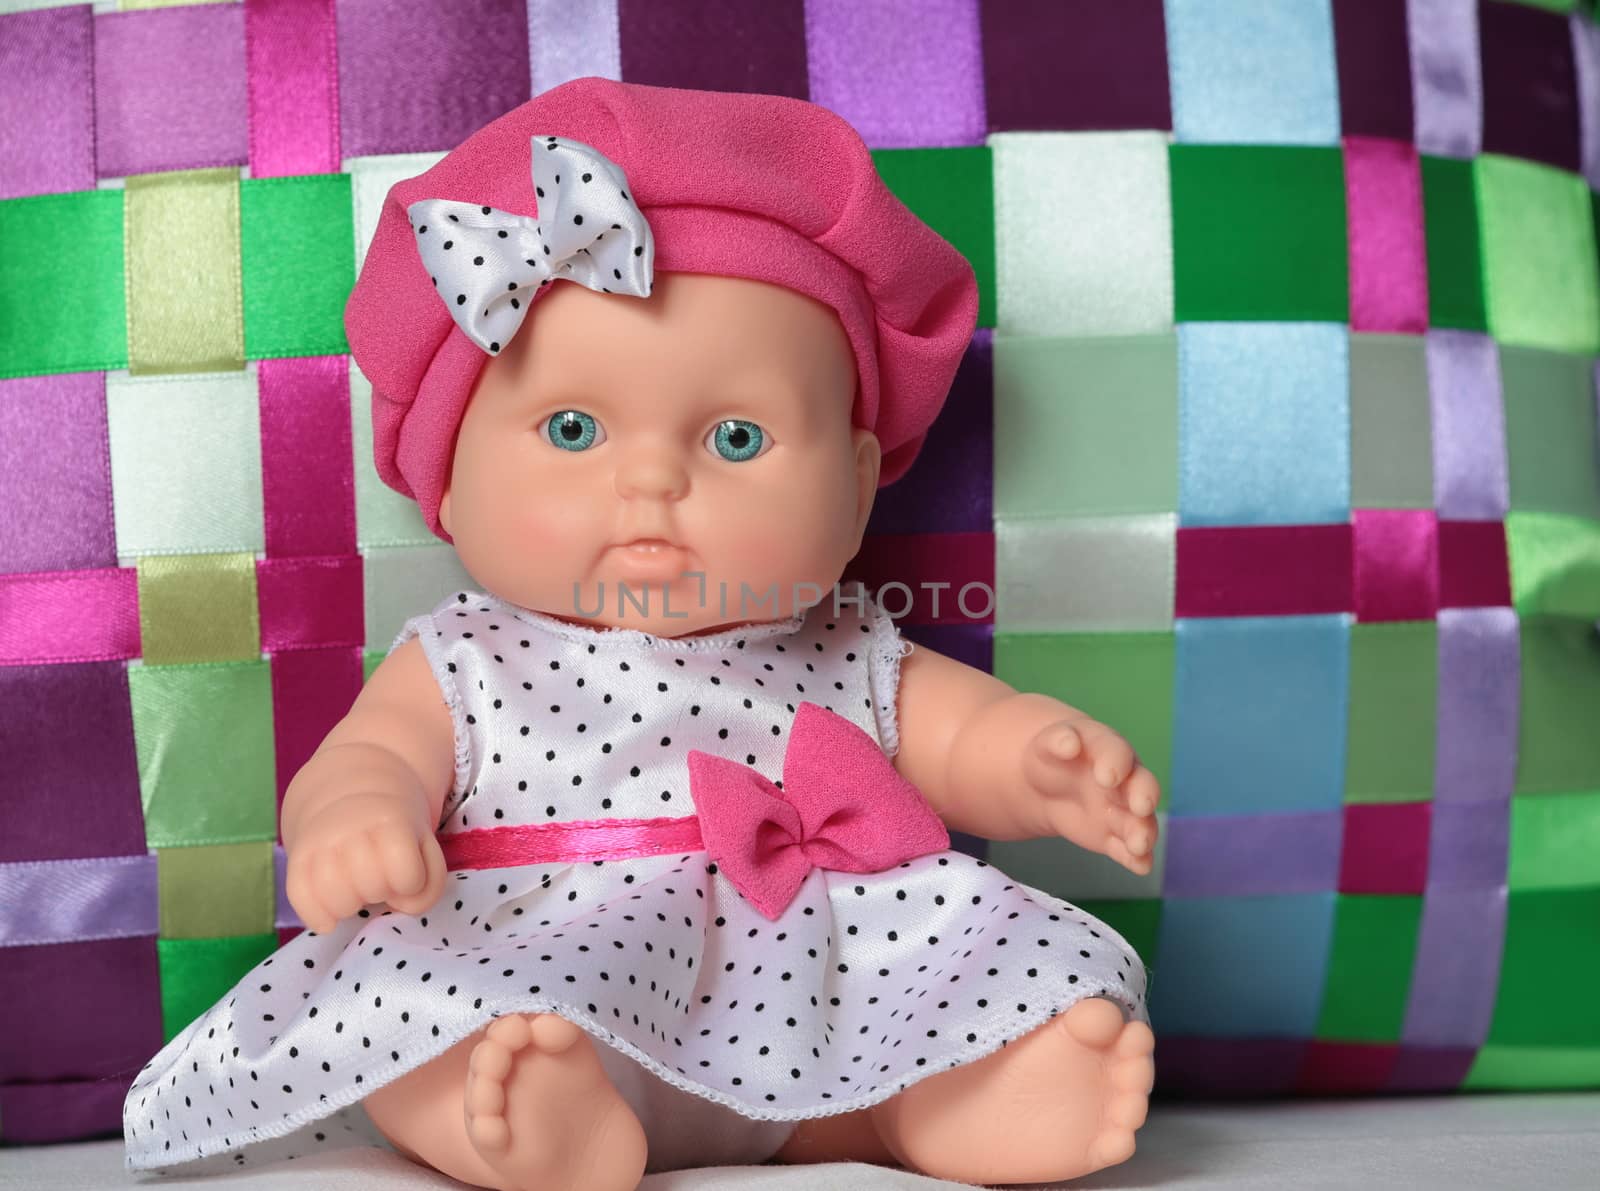 birthday baby doll dress with polka dots nice gift for a child